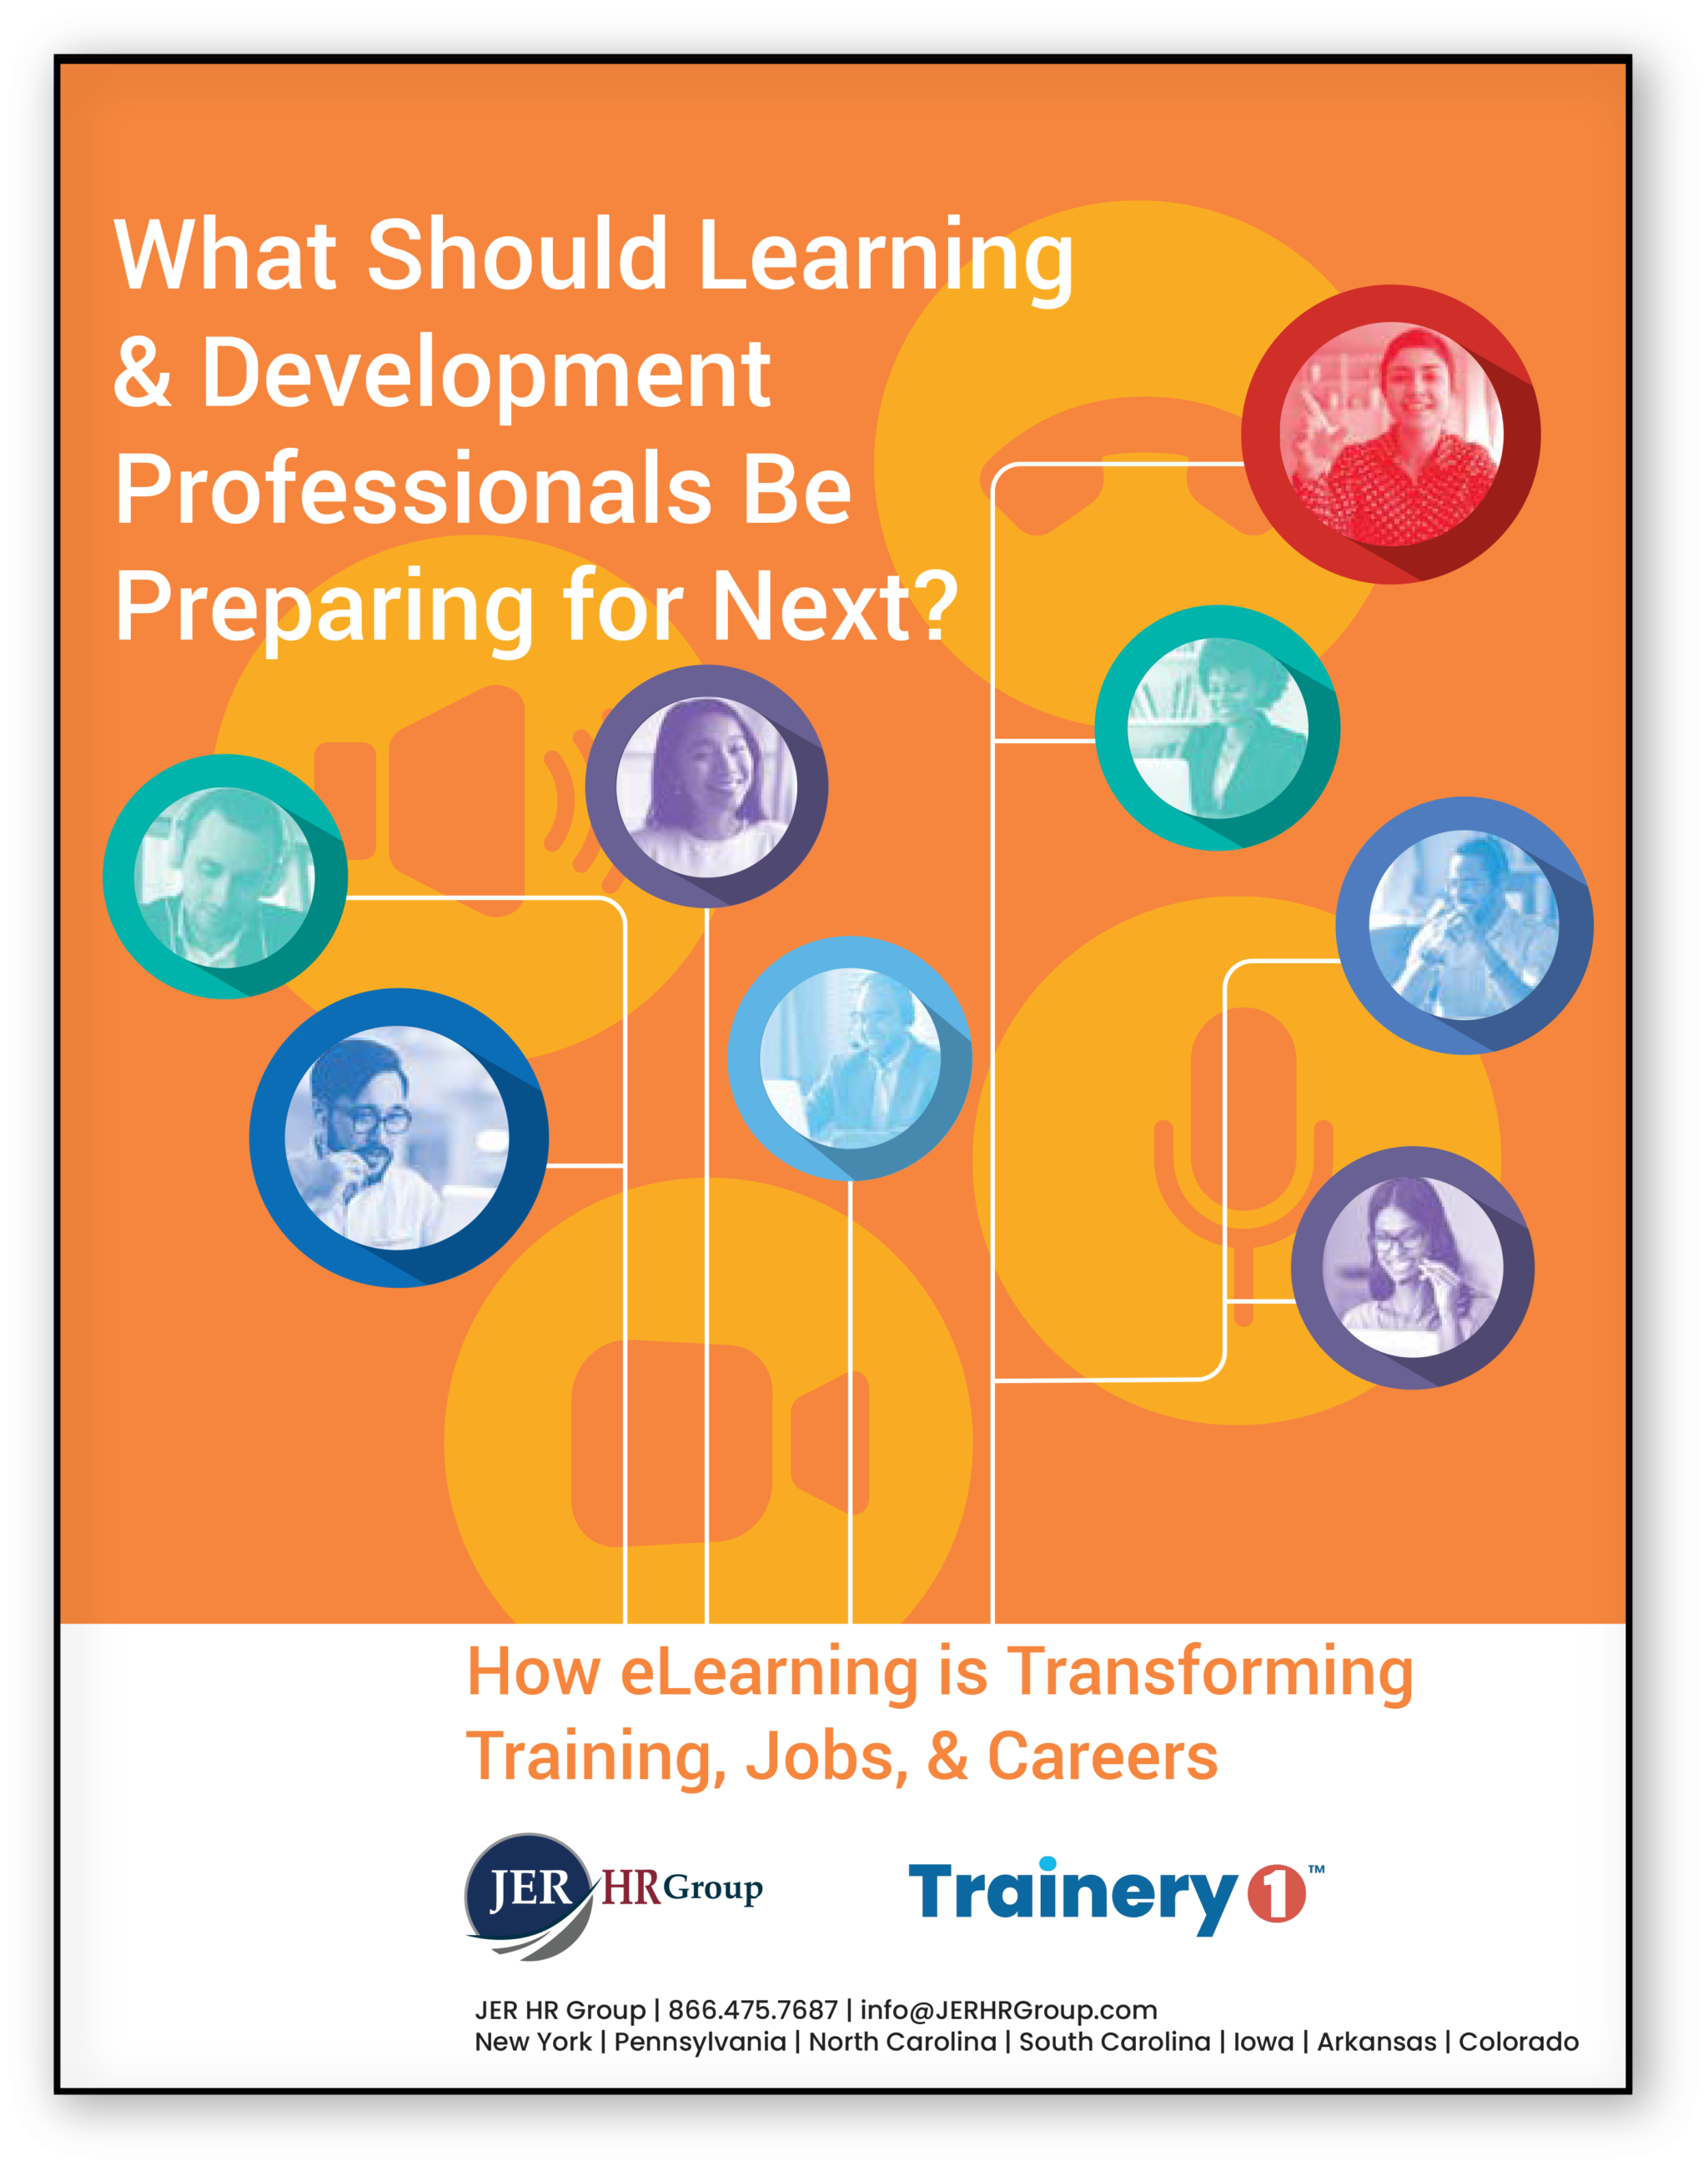 What Should Learning & Development Professionals Be Preparing for Next?